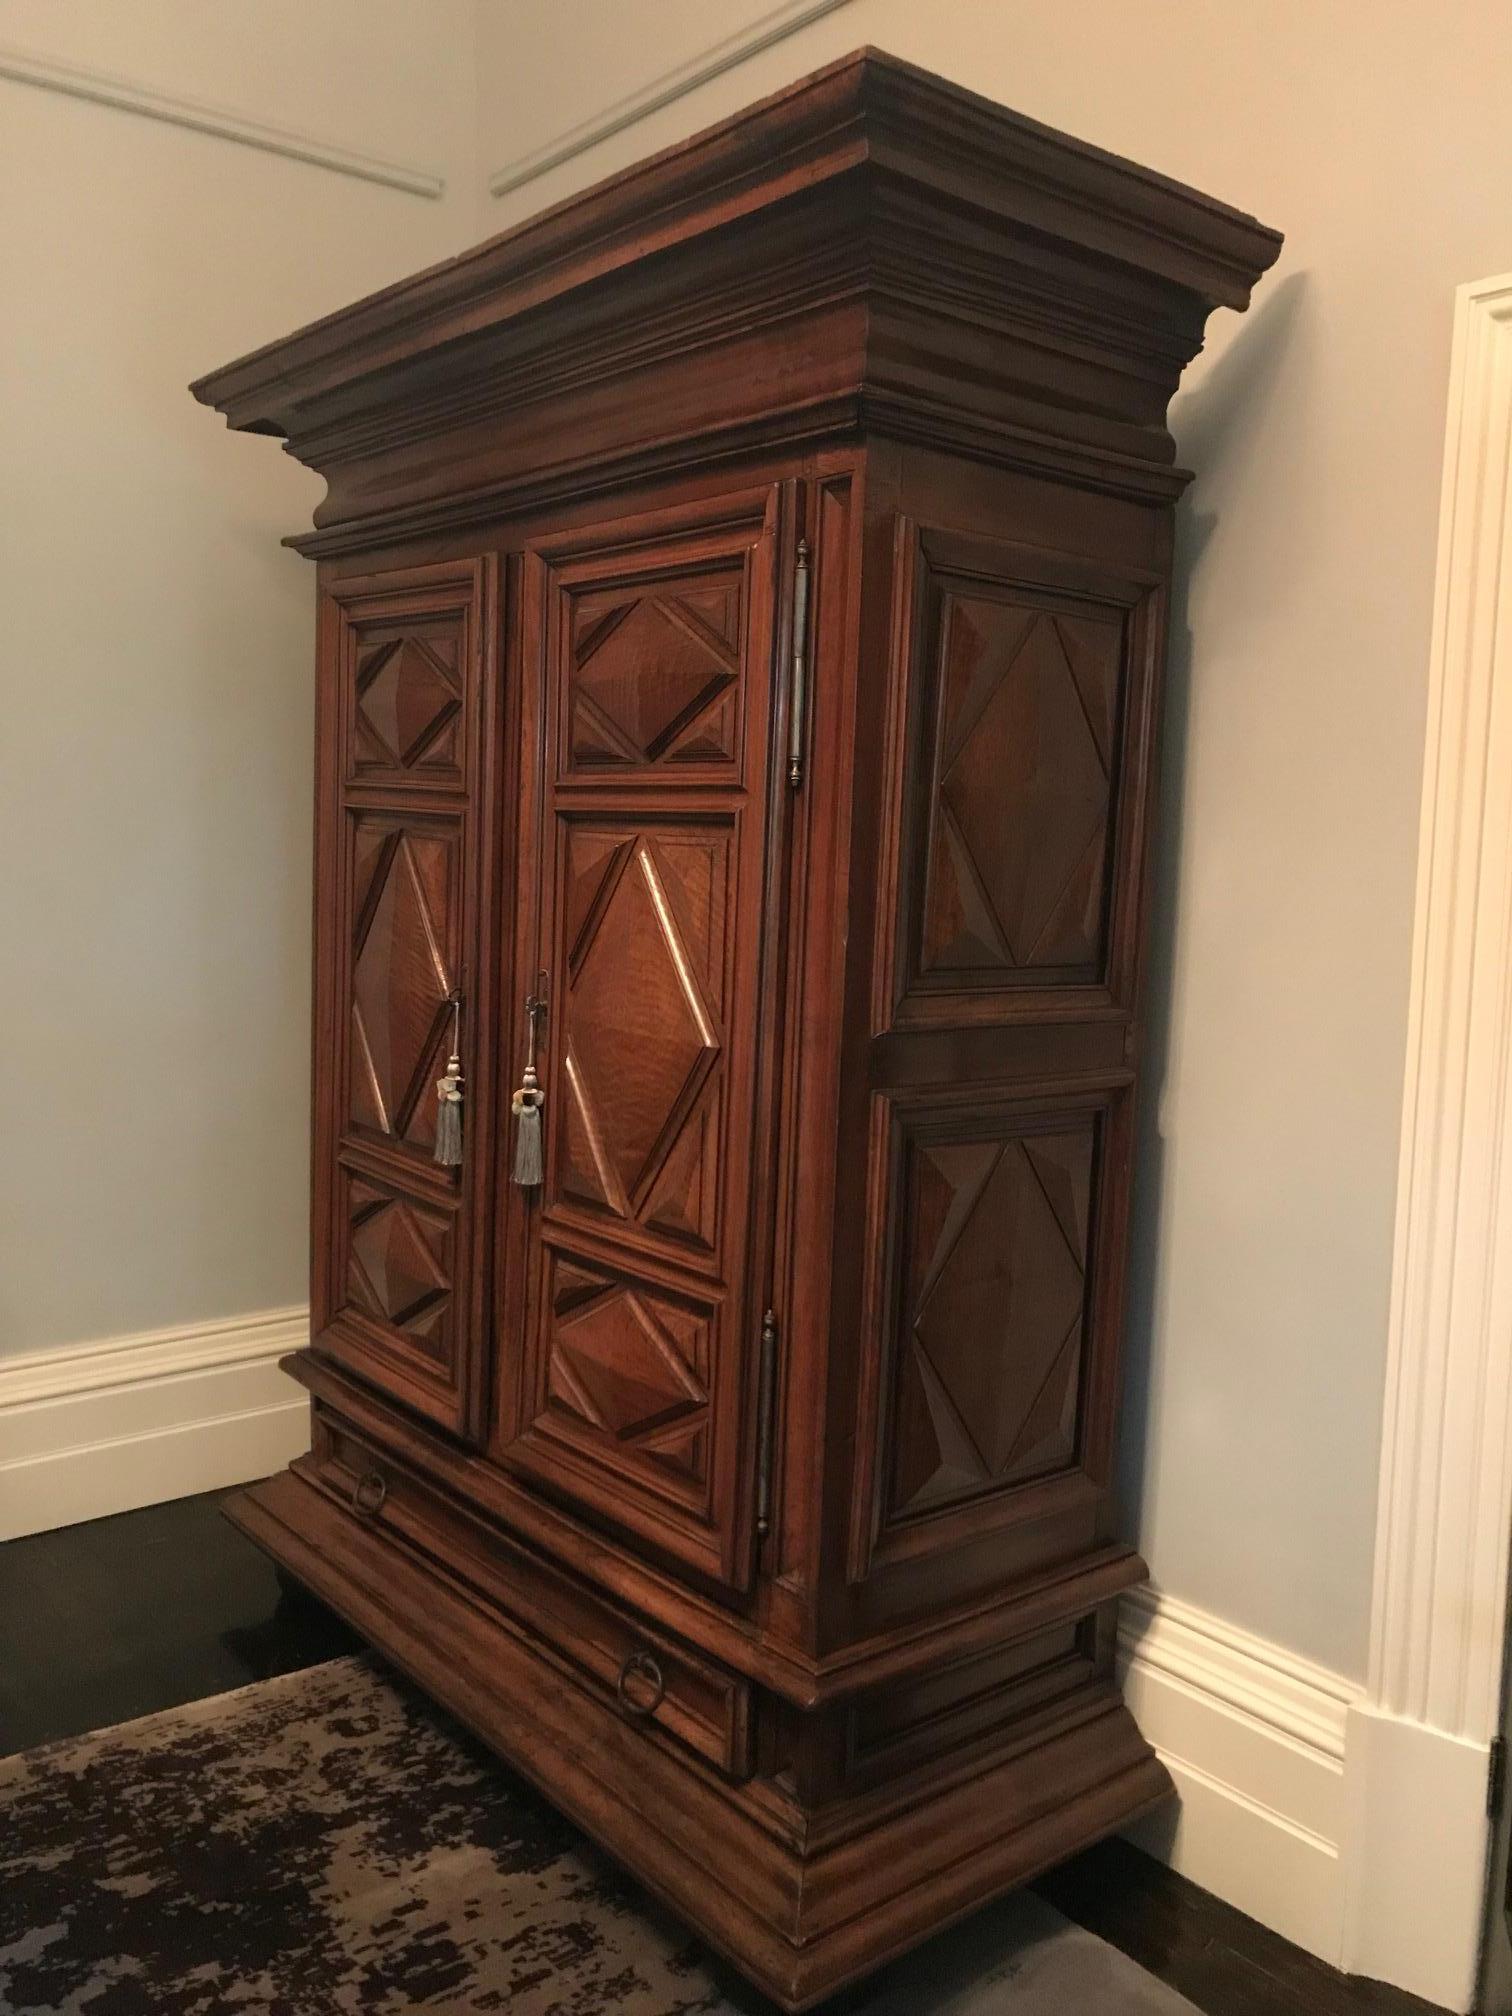 A magnificent and grand Louis XIV walnut armoire, Bordeaux region, French, 18th century

Measures: 244cm high, 198cm wide, 80cm deep
 
Provenance: The Collection of Kerry Moran, Sydney Australia and John Dunn Antiques, Melbourne Australia.